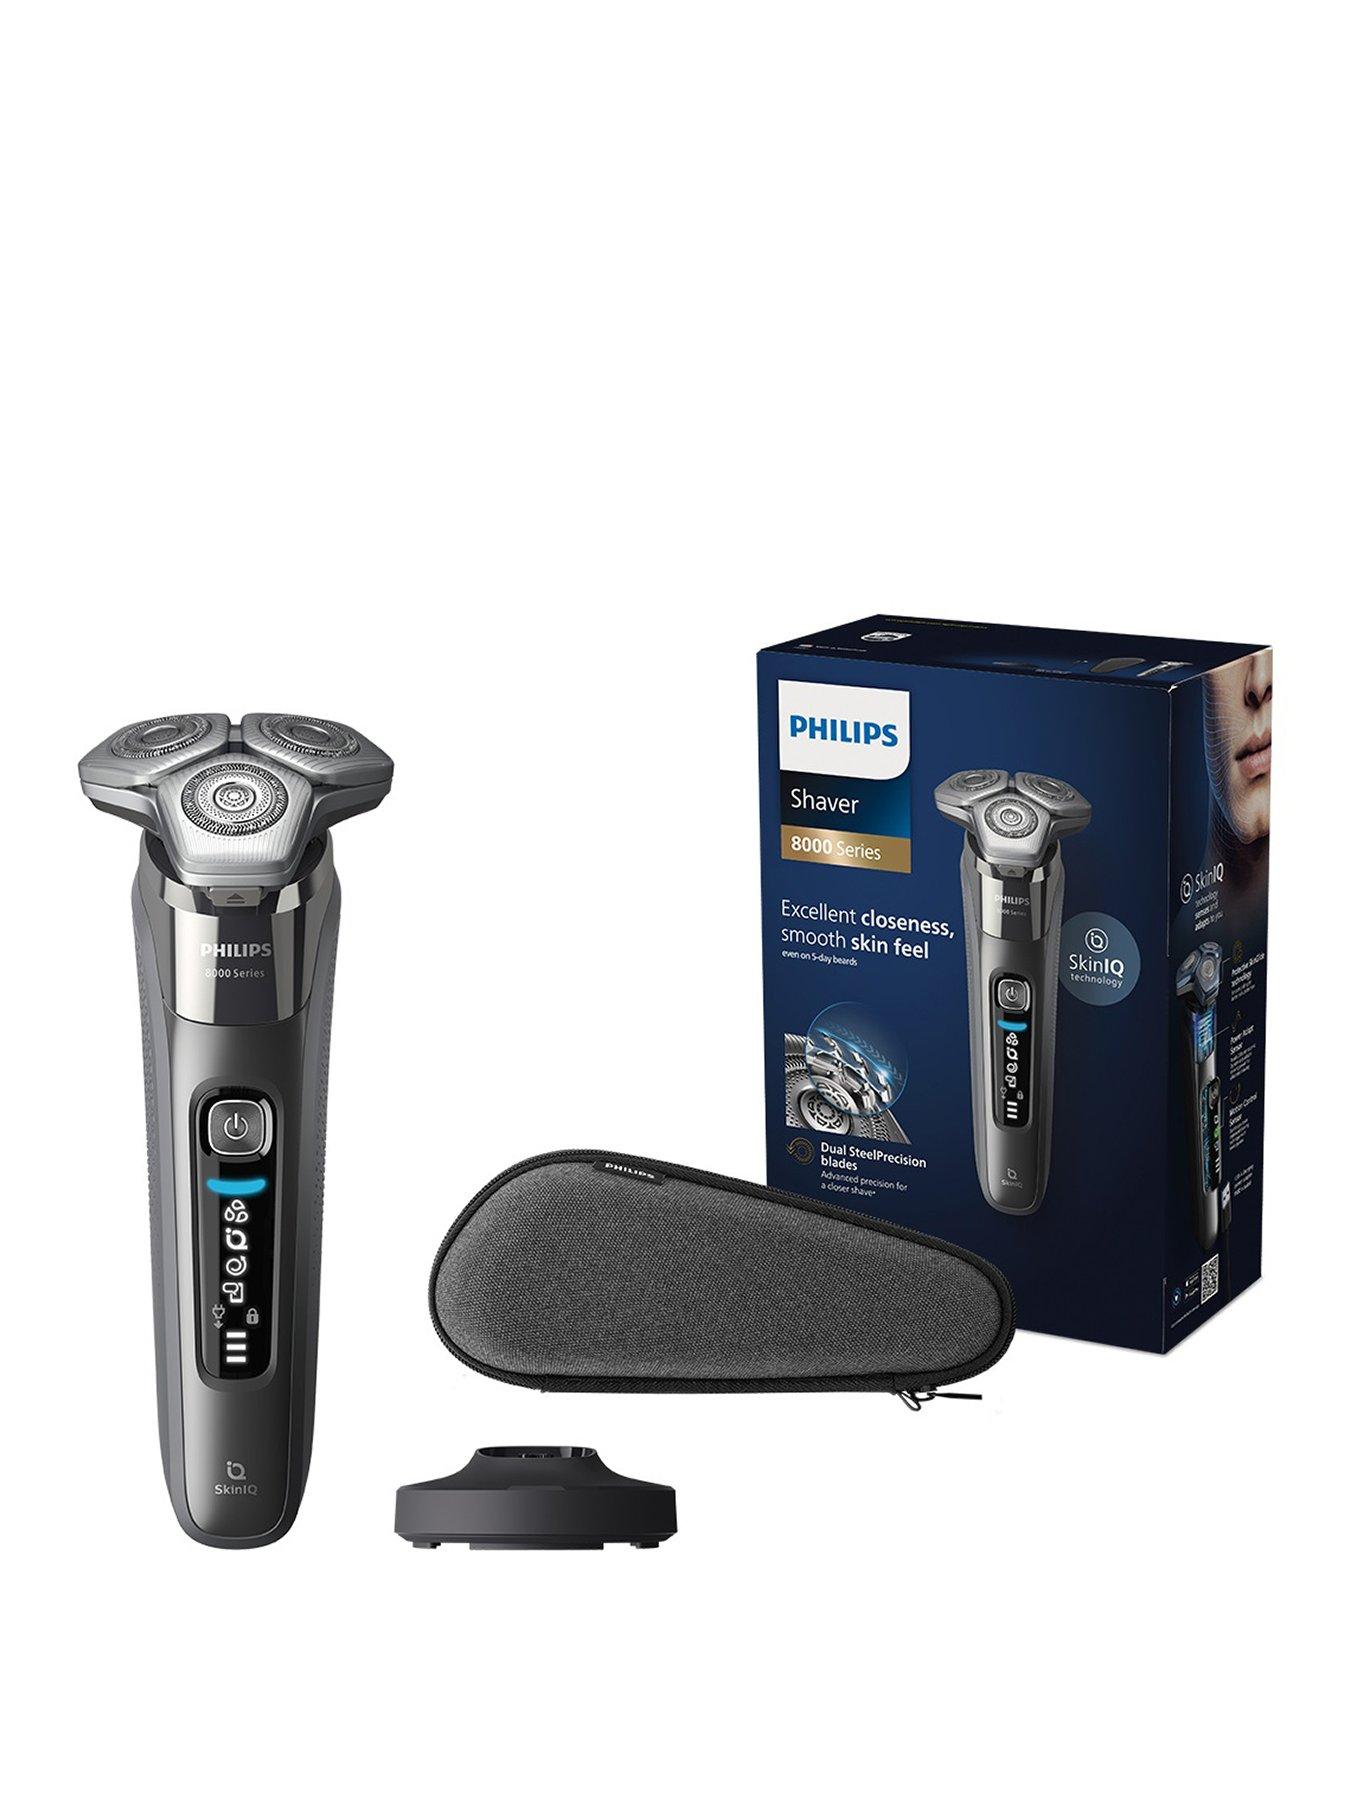 Philips Series 3000 Shaver - Wet and Dry